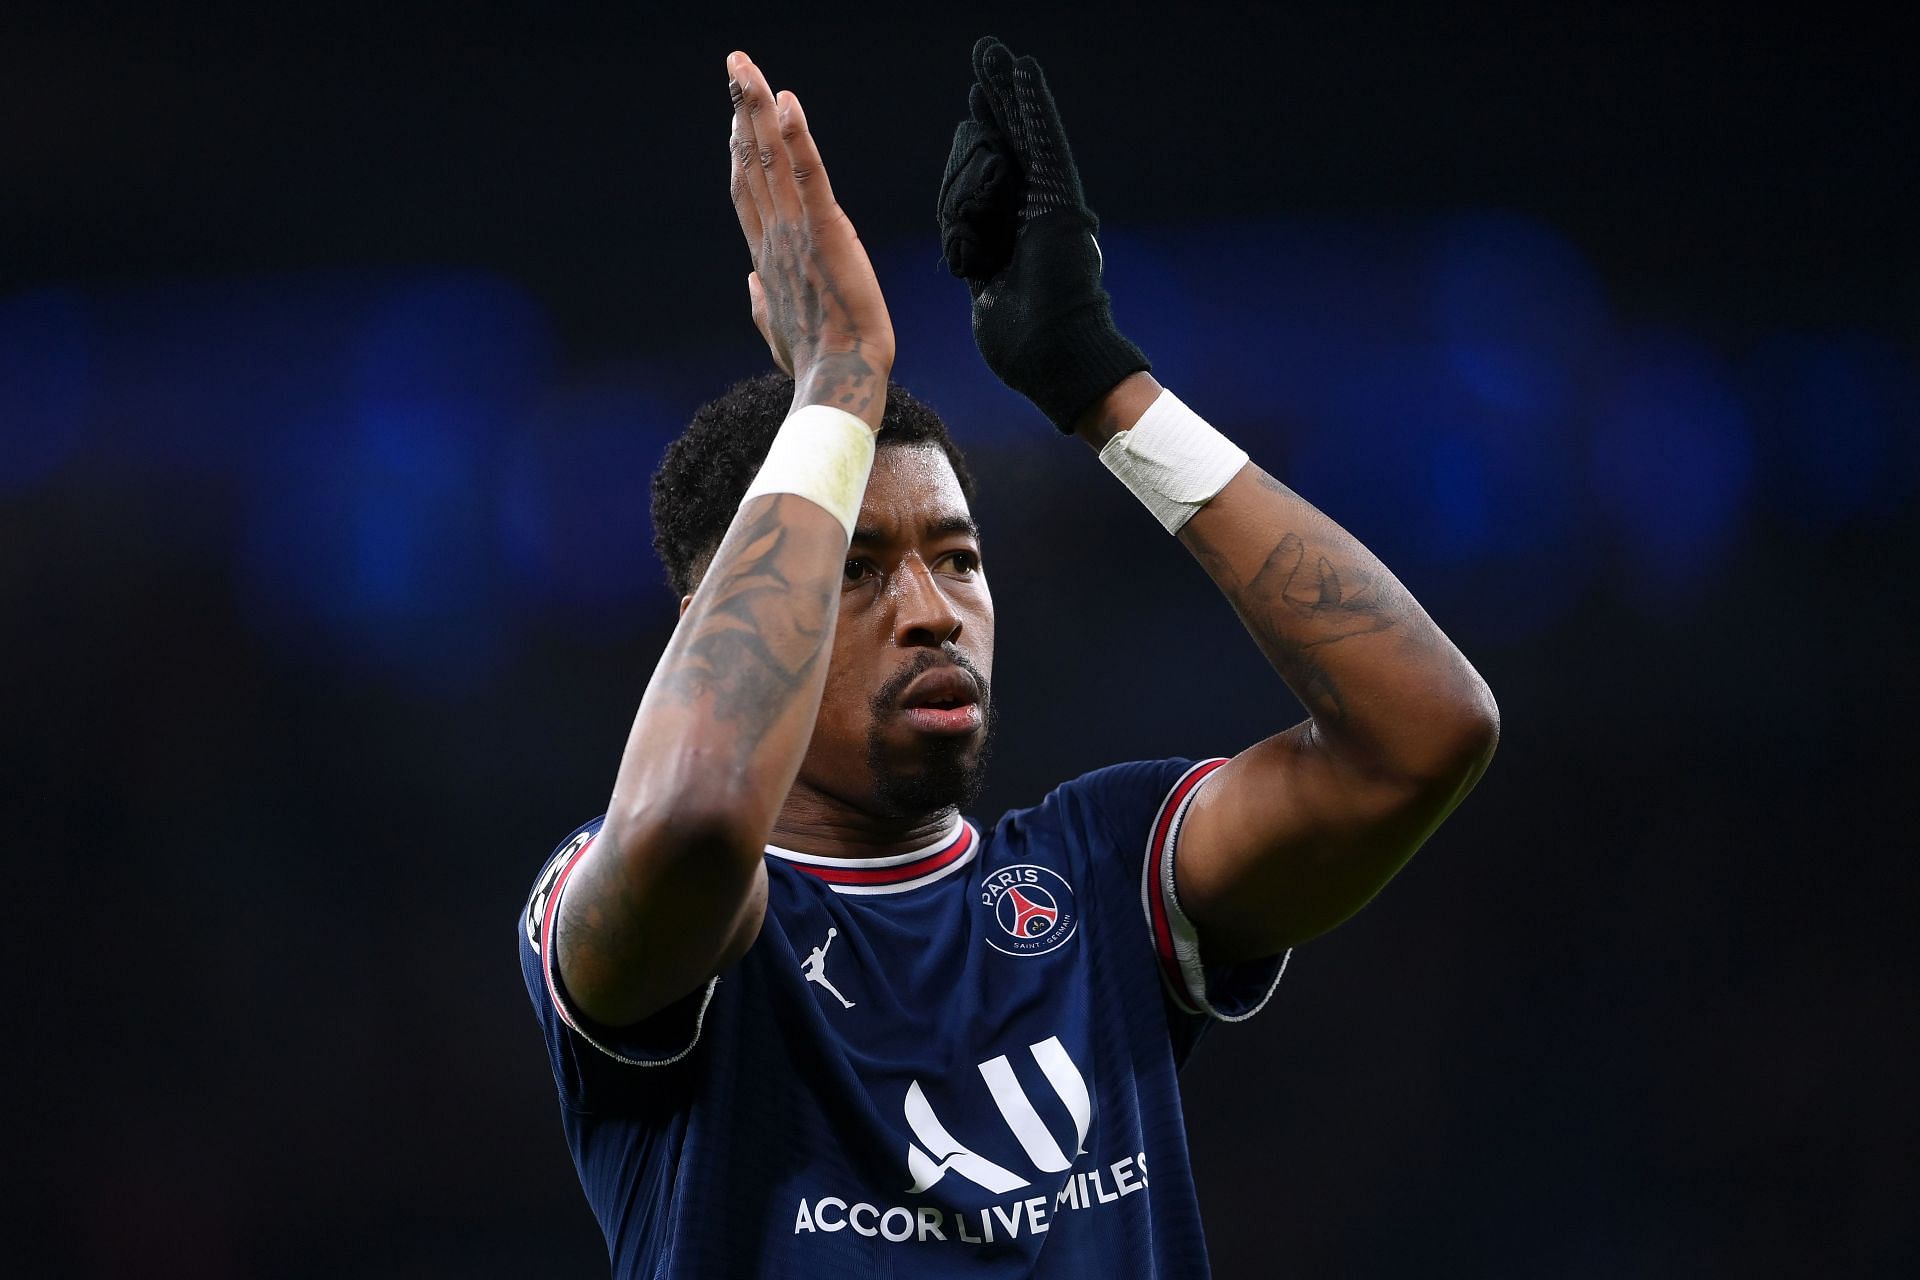 Presnel Kimbpembe has had a successful stint with the Parisians.